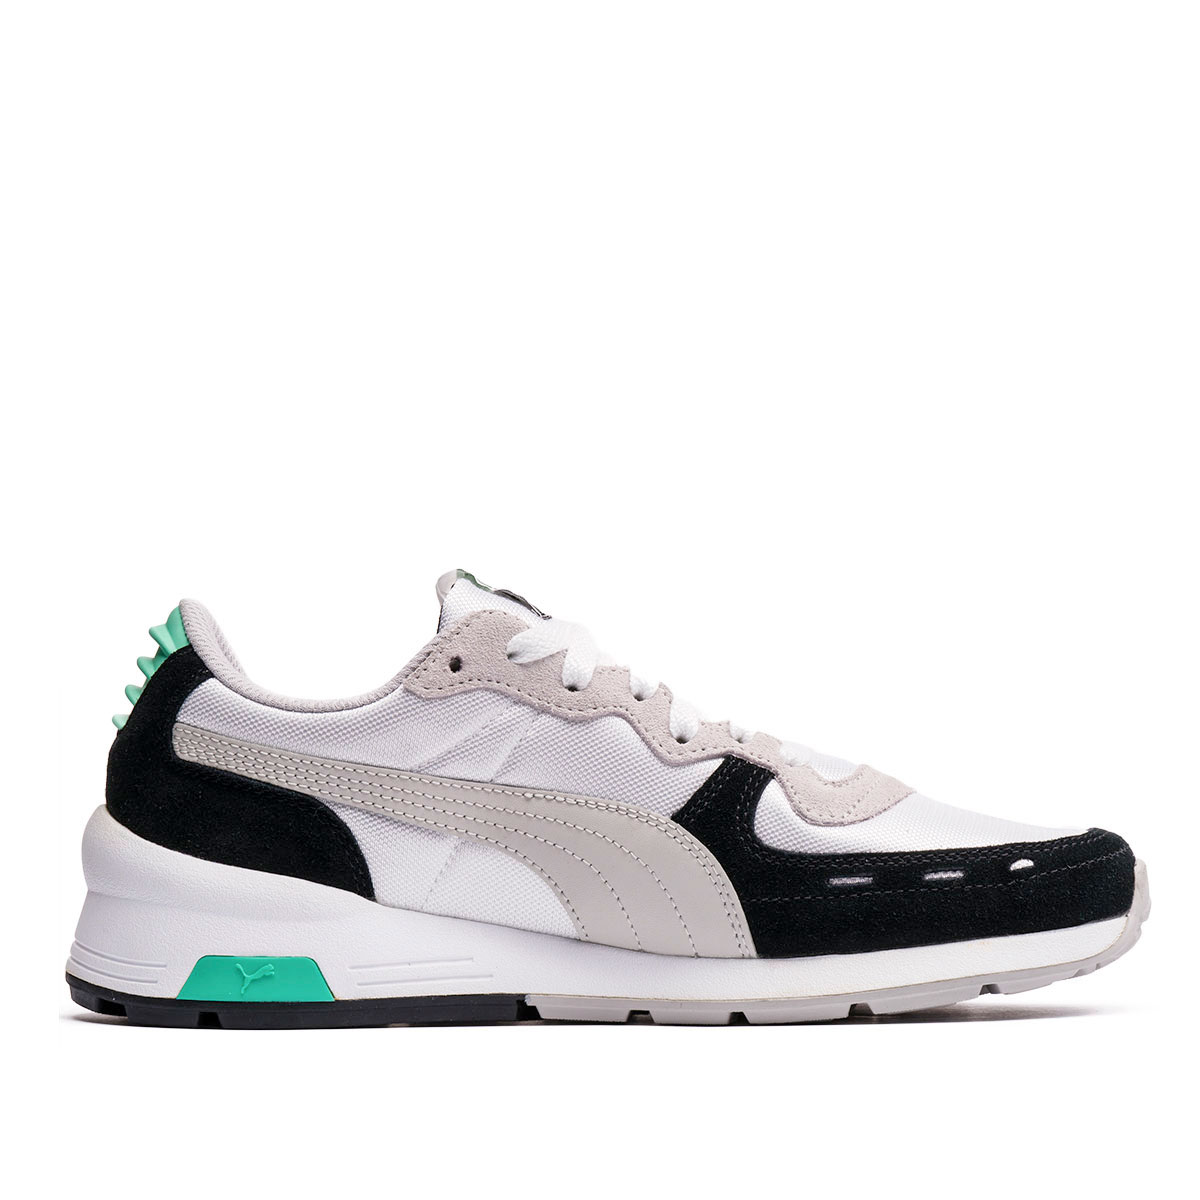 Puma RS 350 Re-Invention  367914-01